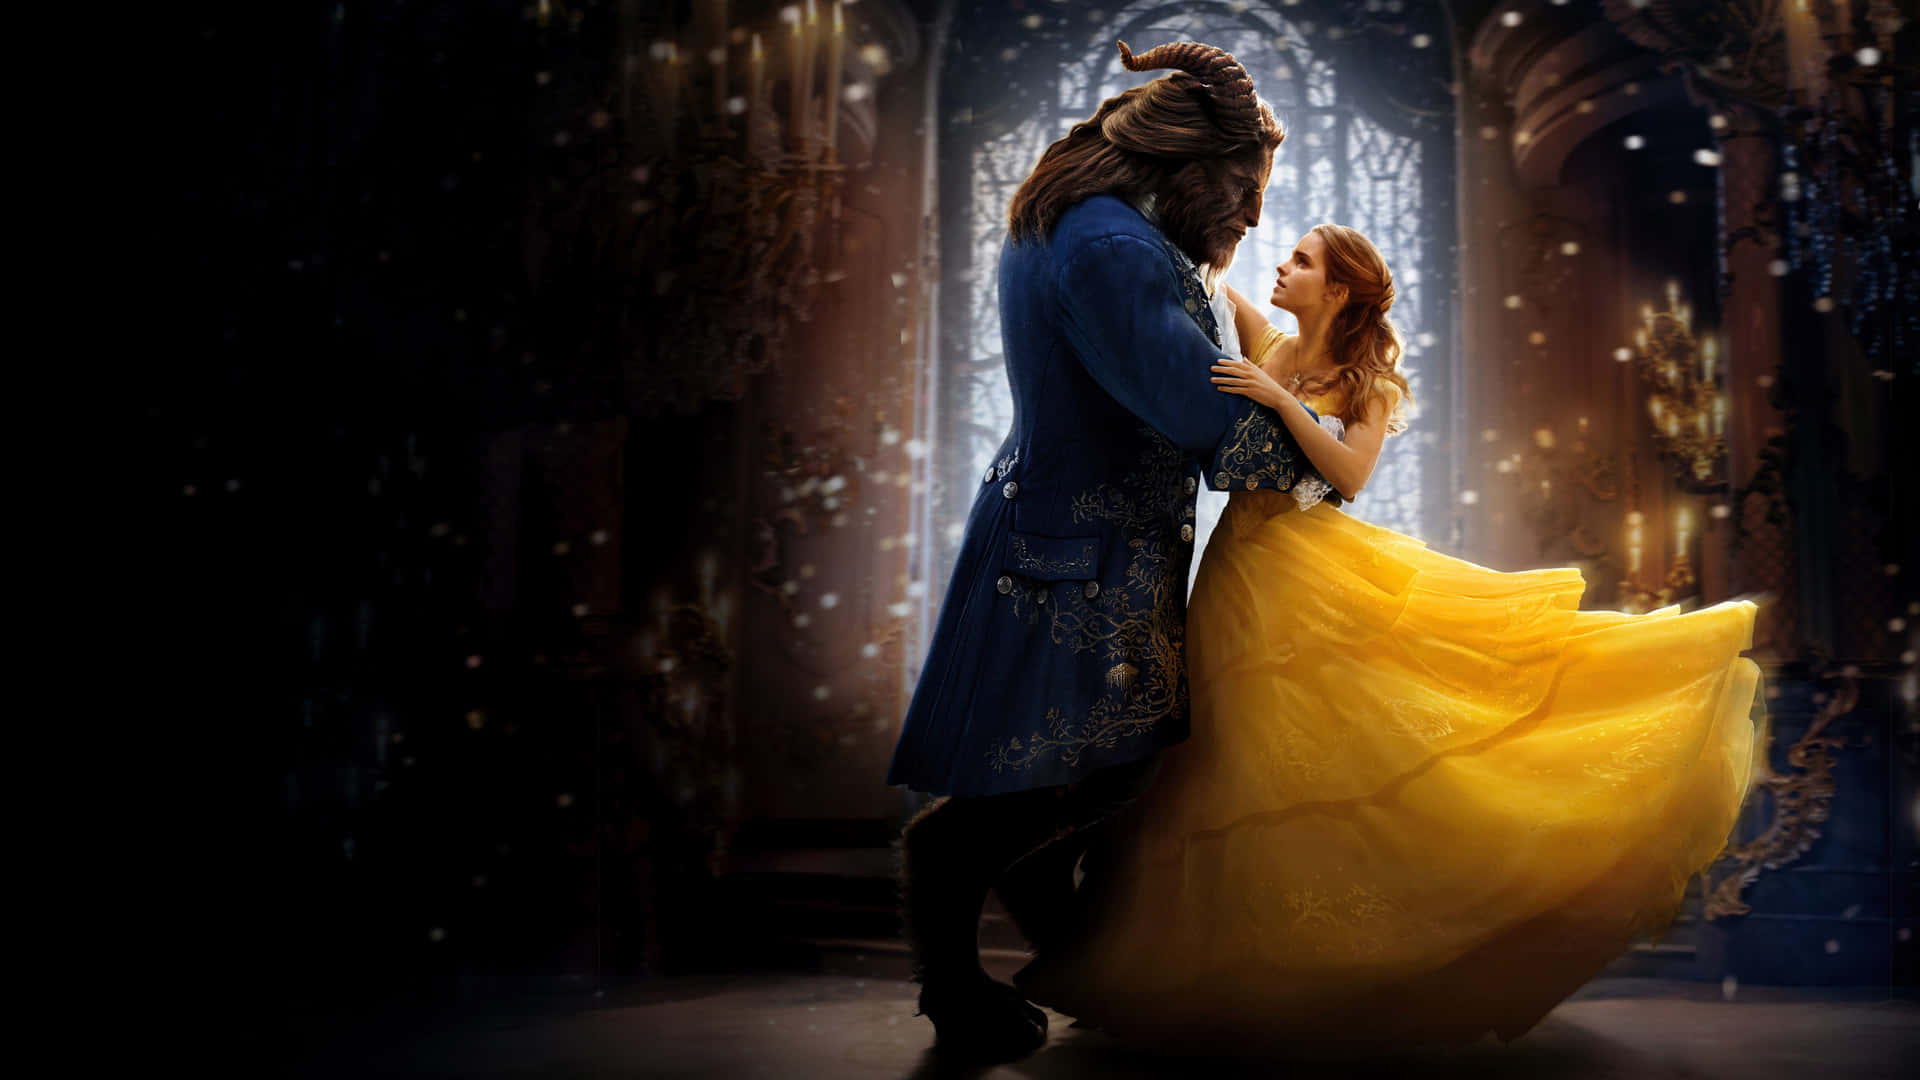 Enchanting Fairytale Moments - Belle And Beast Dancing